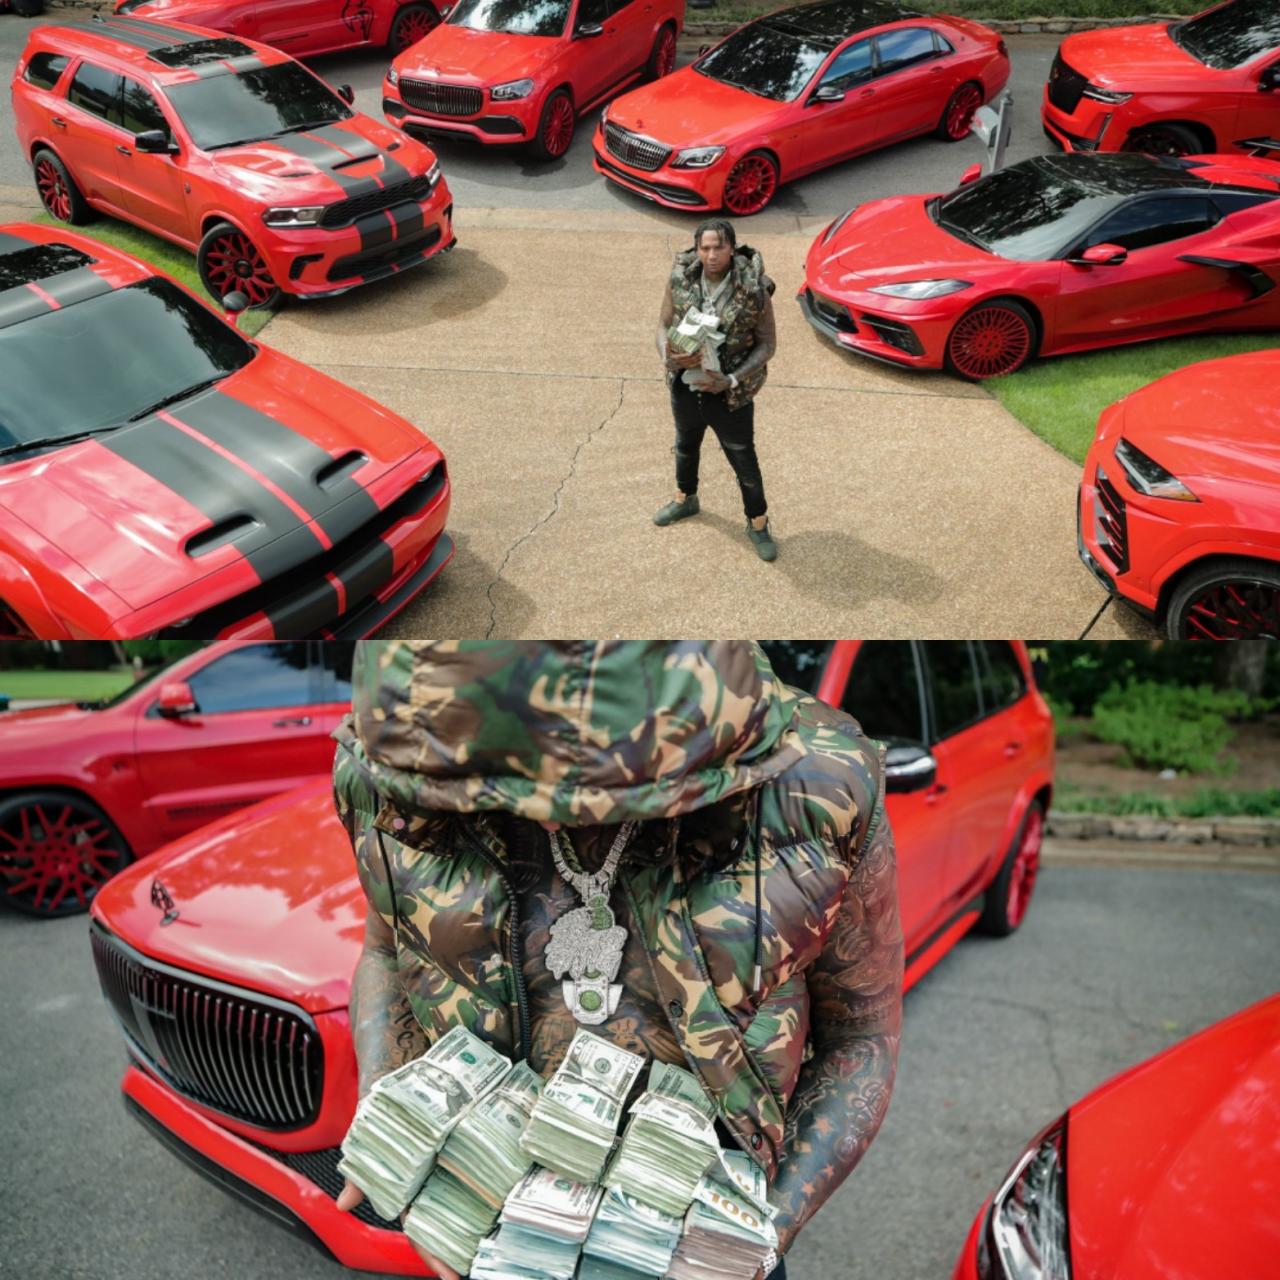 "I had nothing but Fs on my report card. Everything is possible" Rapper Moneybagg Yo shows off his luxury cars and money as he turns 30